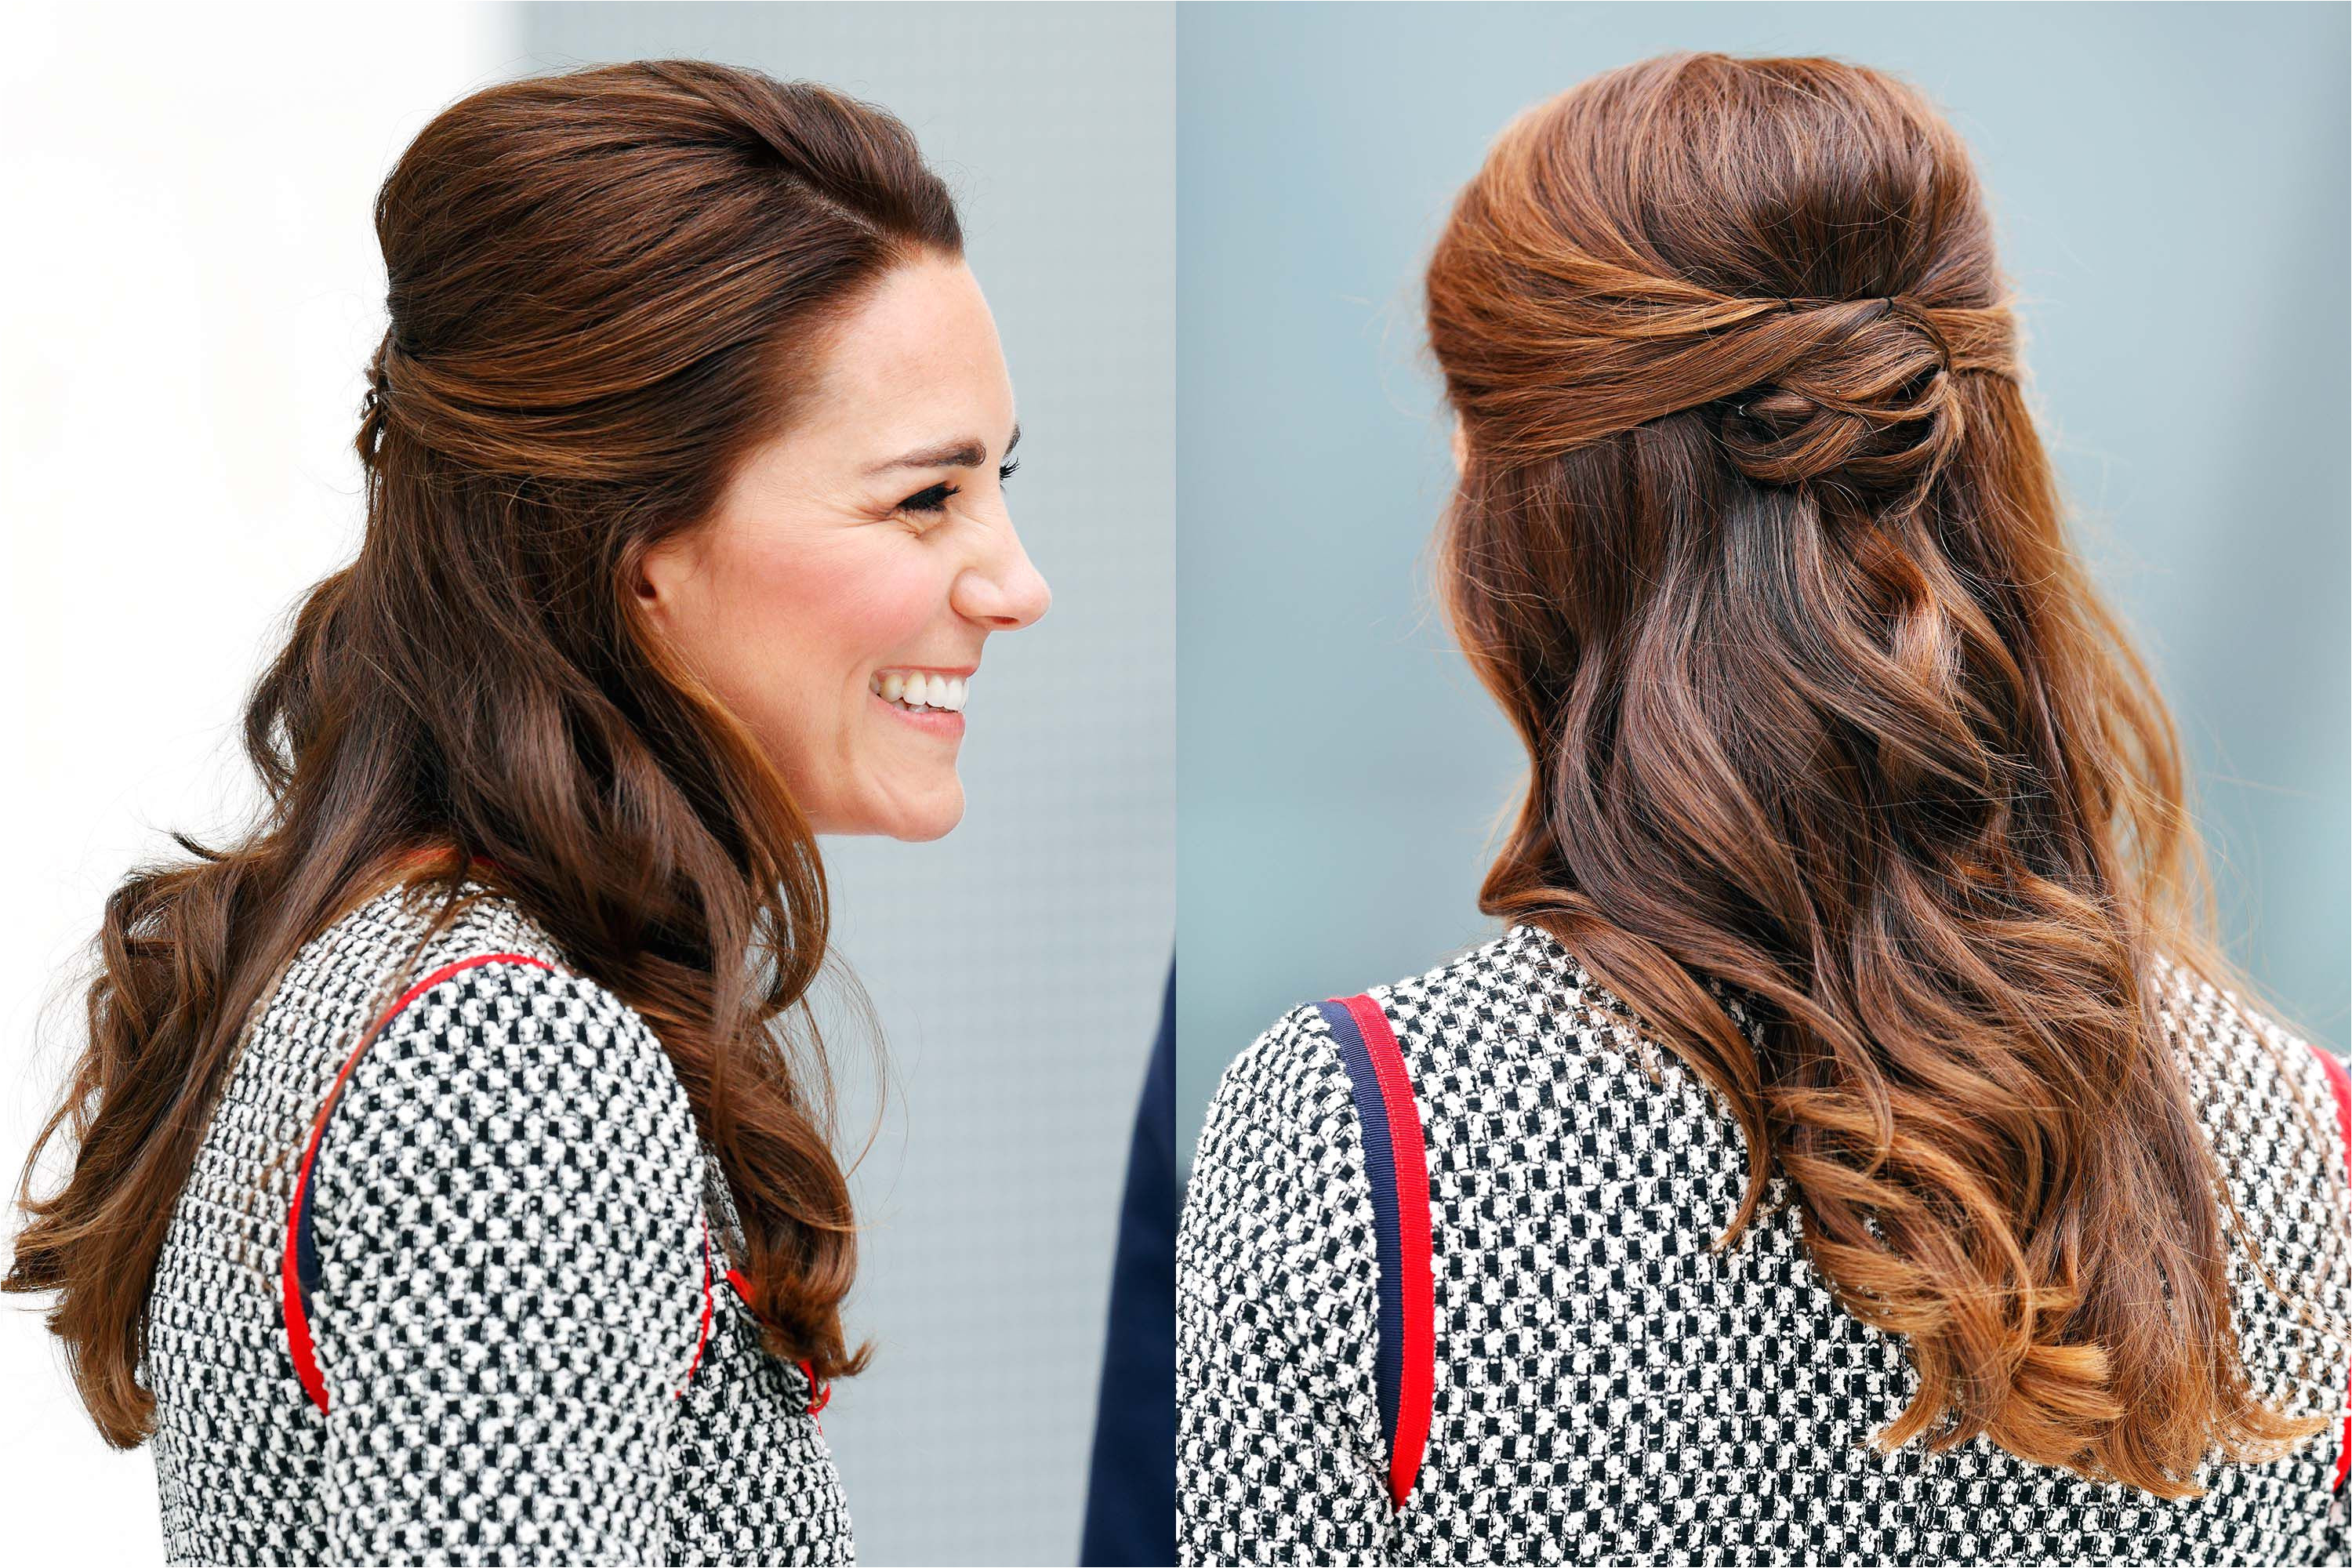 Kate Middleton s 37 Best Hair Looks Our Favorite Princess Kate Hairstyles